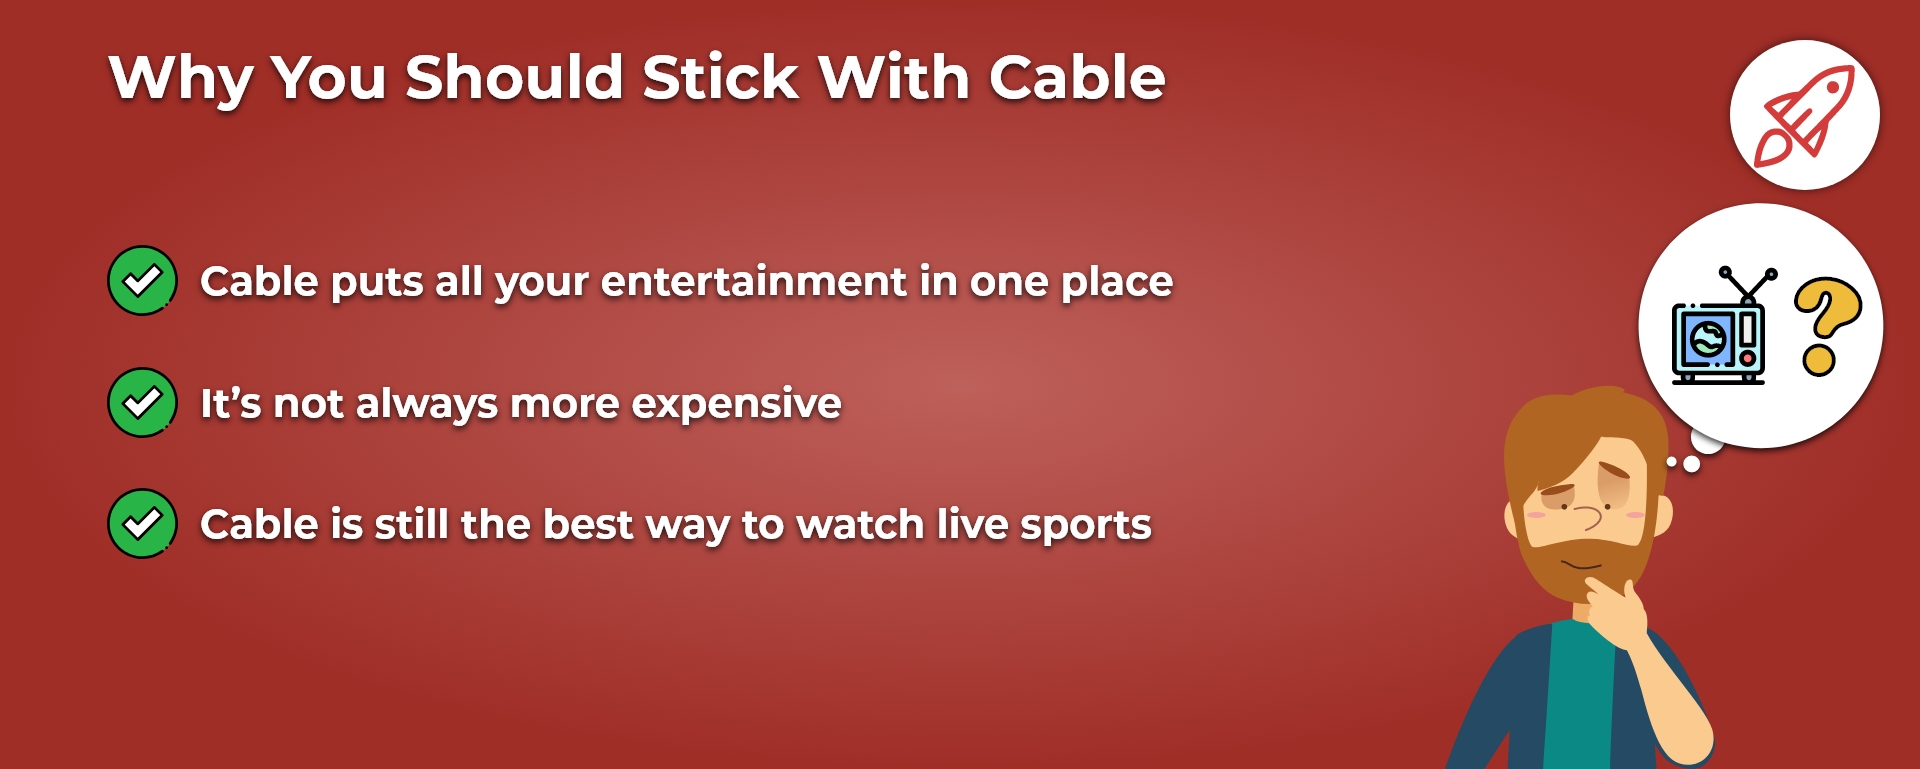 Why You Should Keep Your Cable Subscription